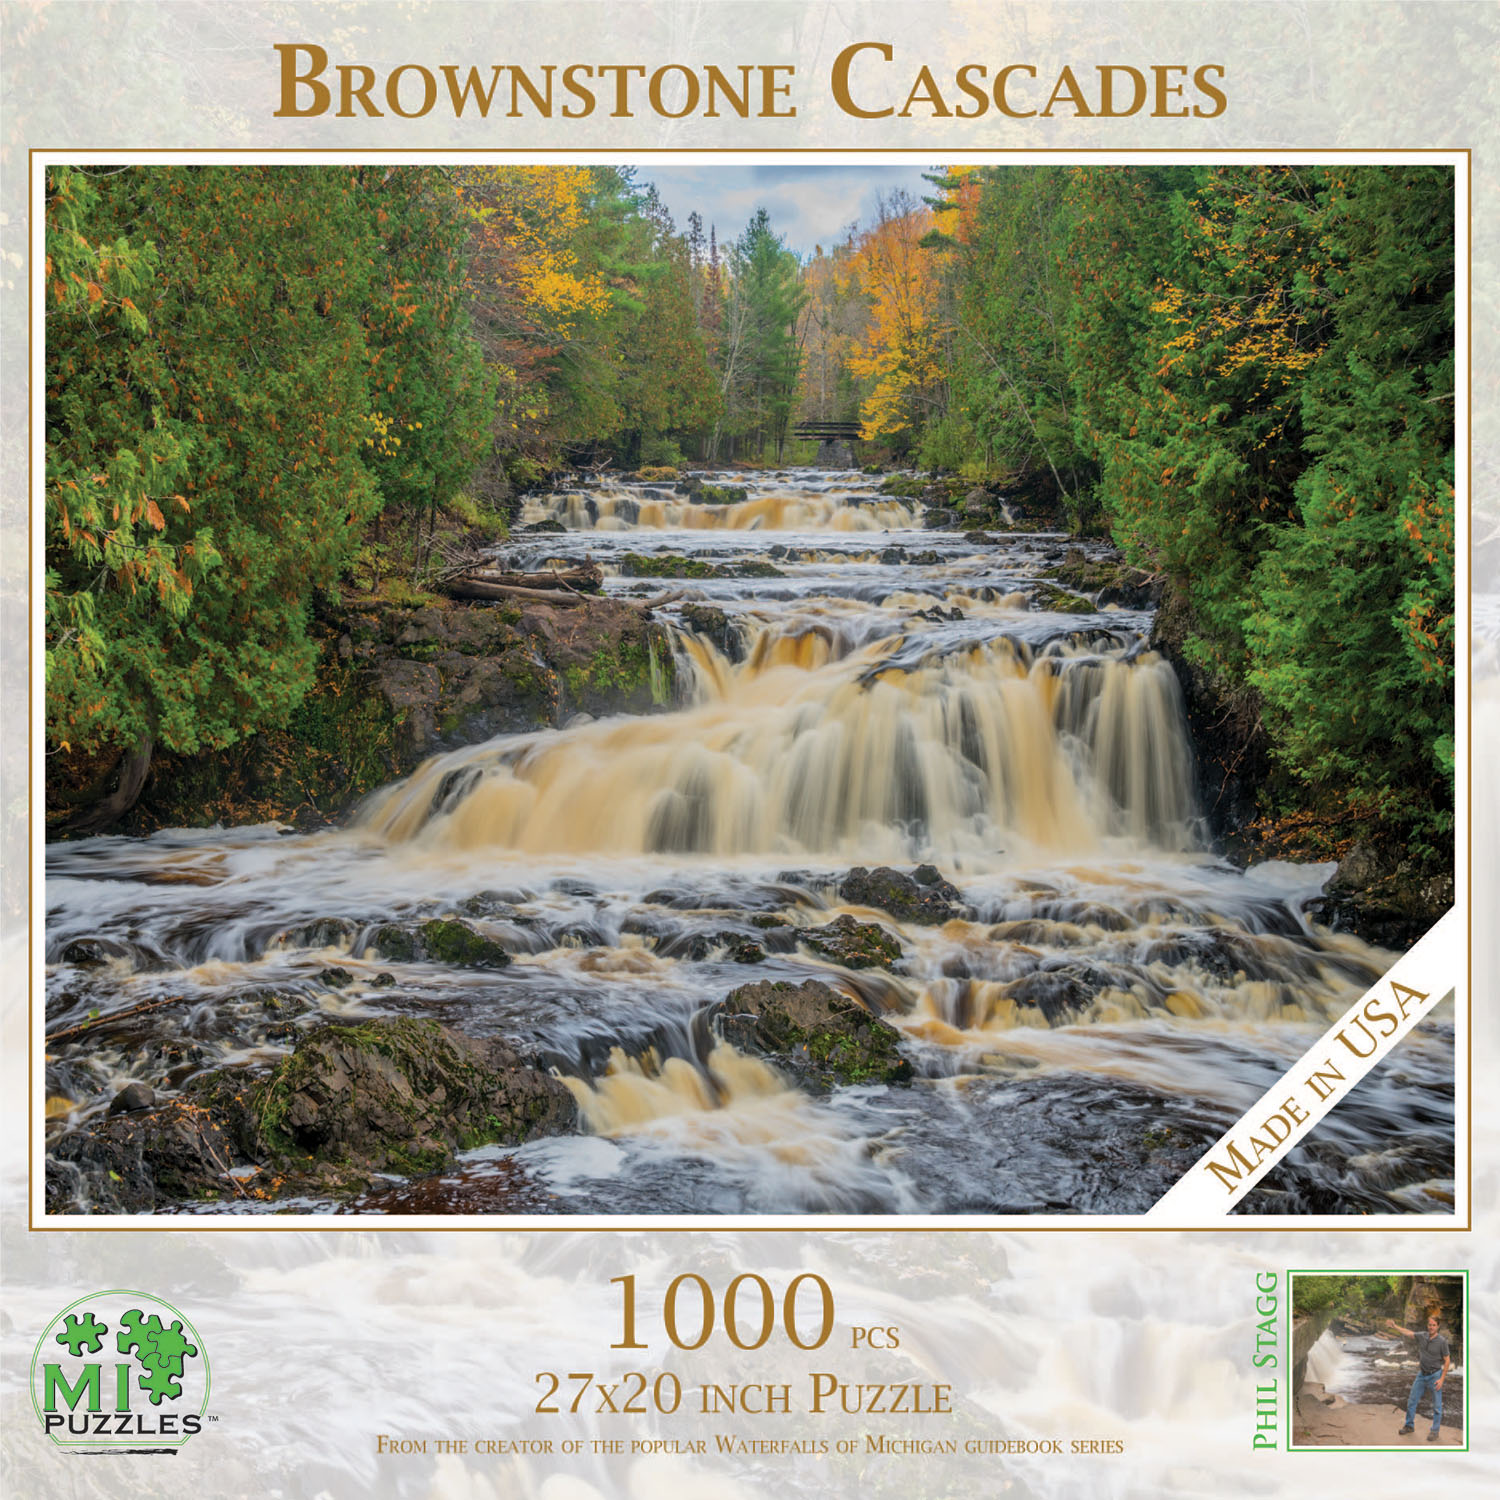 Brownstone Cascades Photography Jigsaw Puzzle